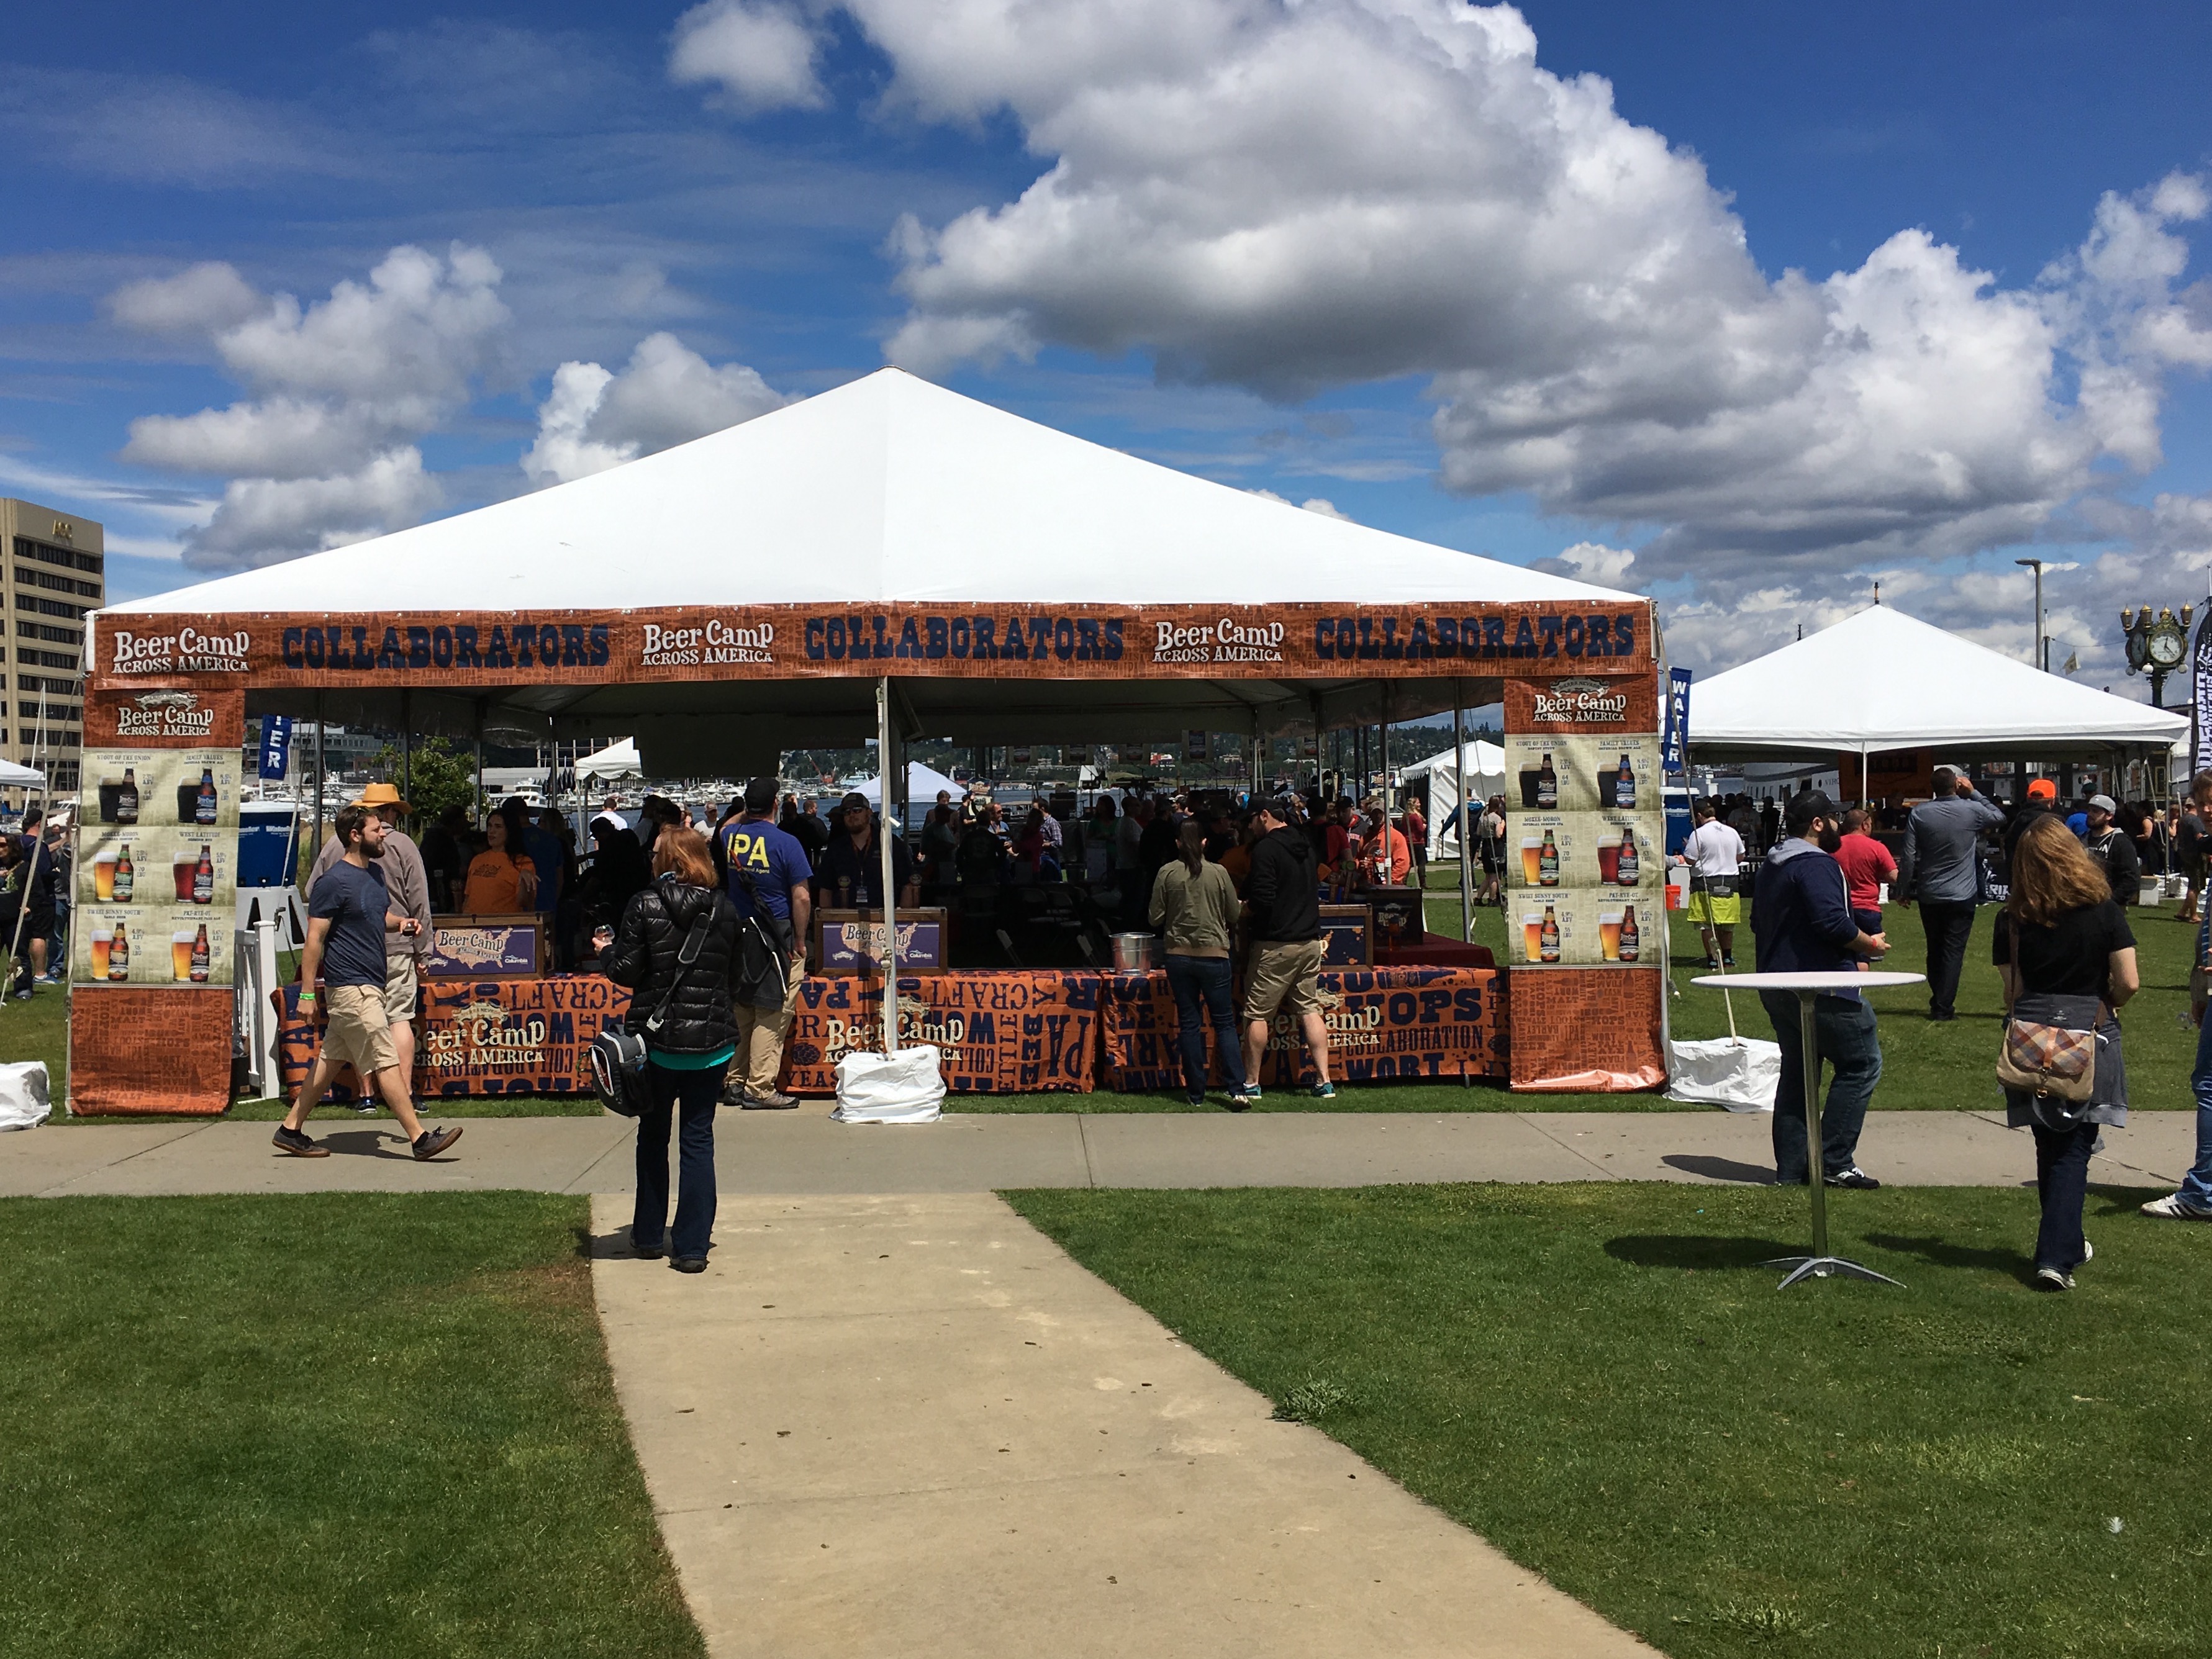 Well situated beer tents at Sierra Nevada Beer Camp Across America Festival in Seattle. (photo by D.J. Paul)